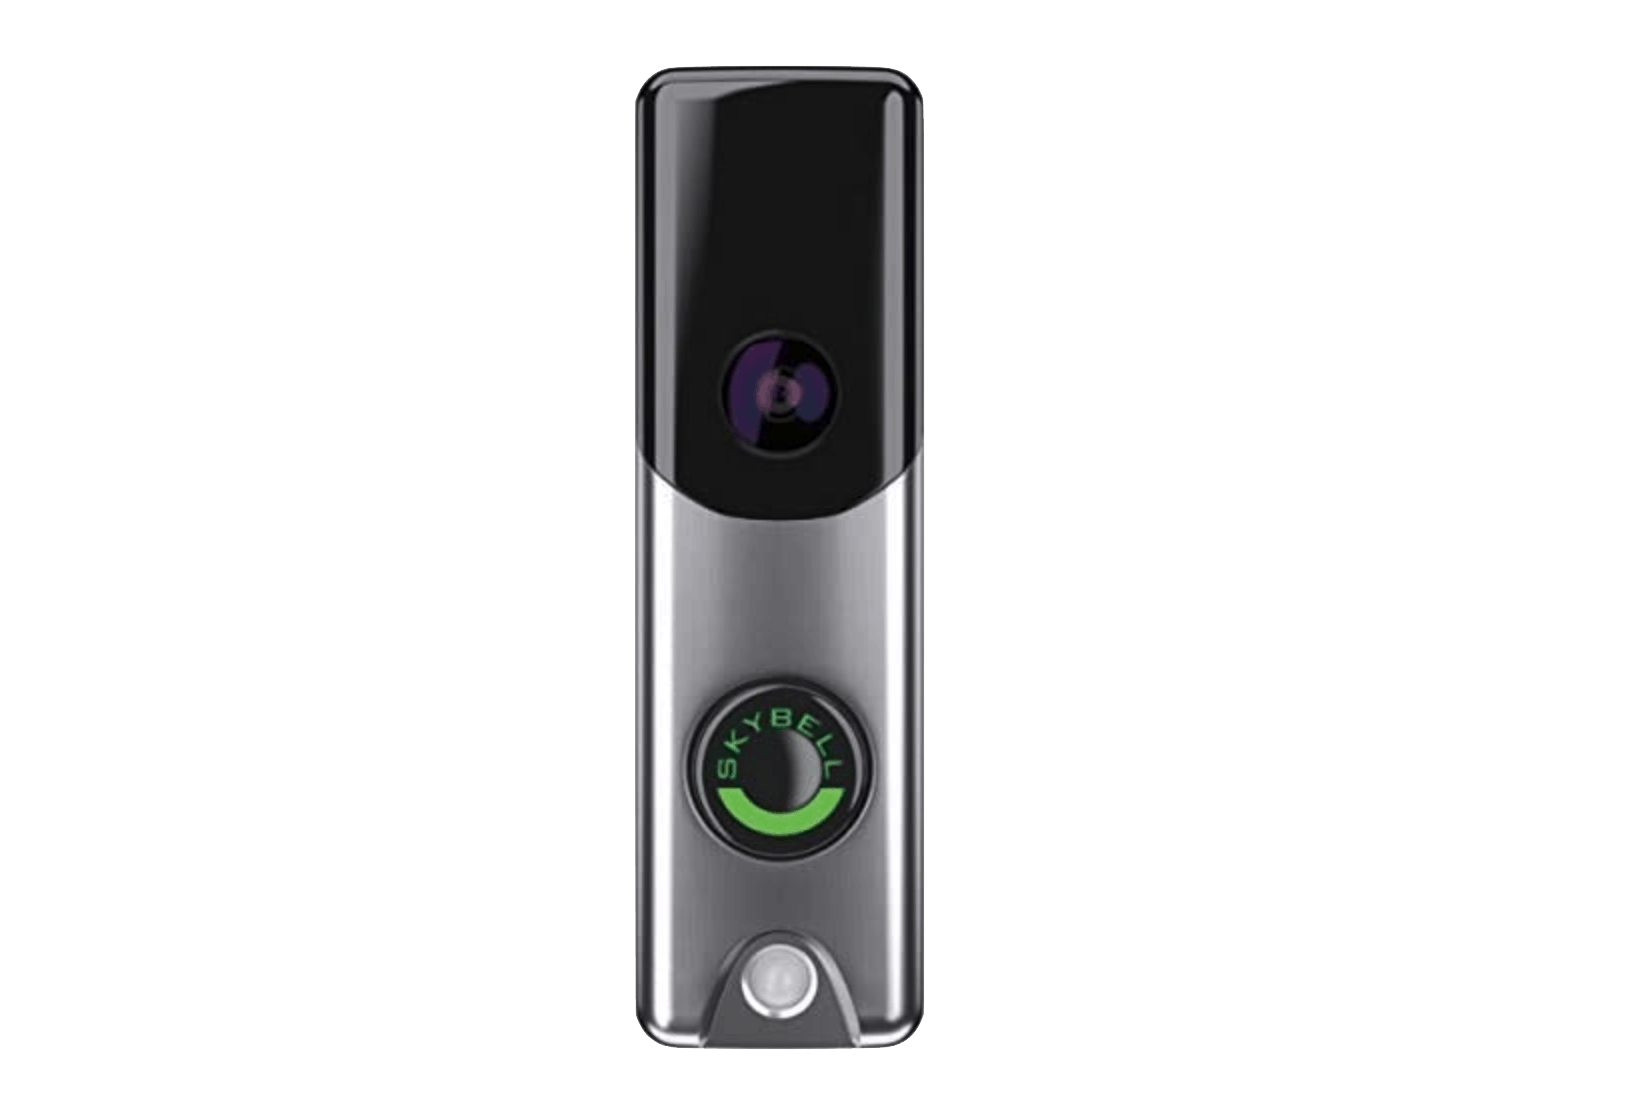 SkyBell Slim Line Video Doorbell - Product Image